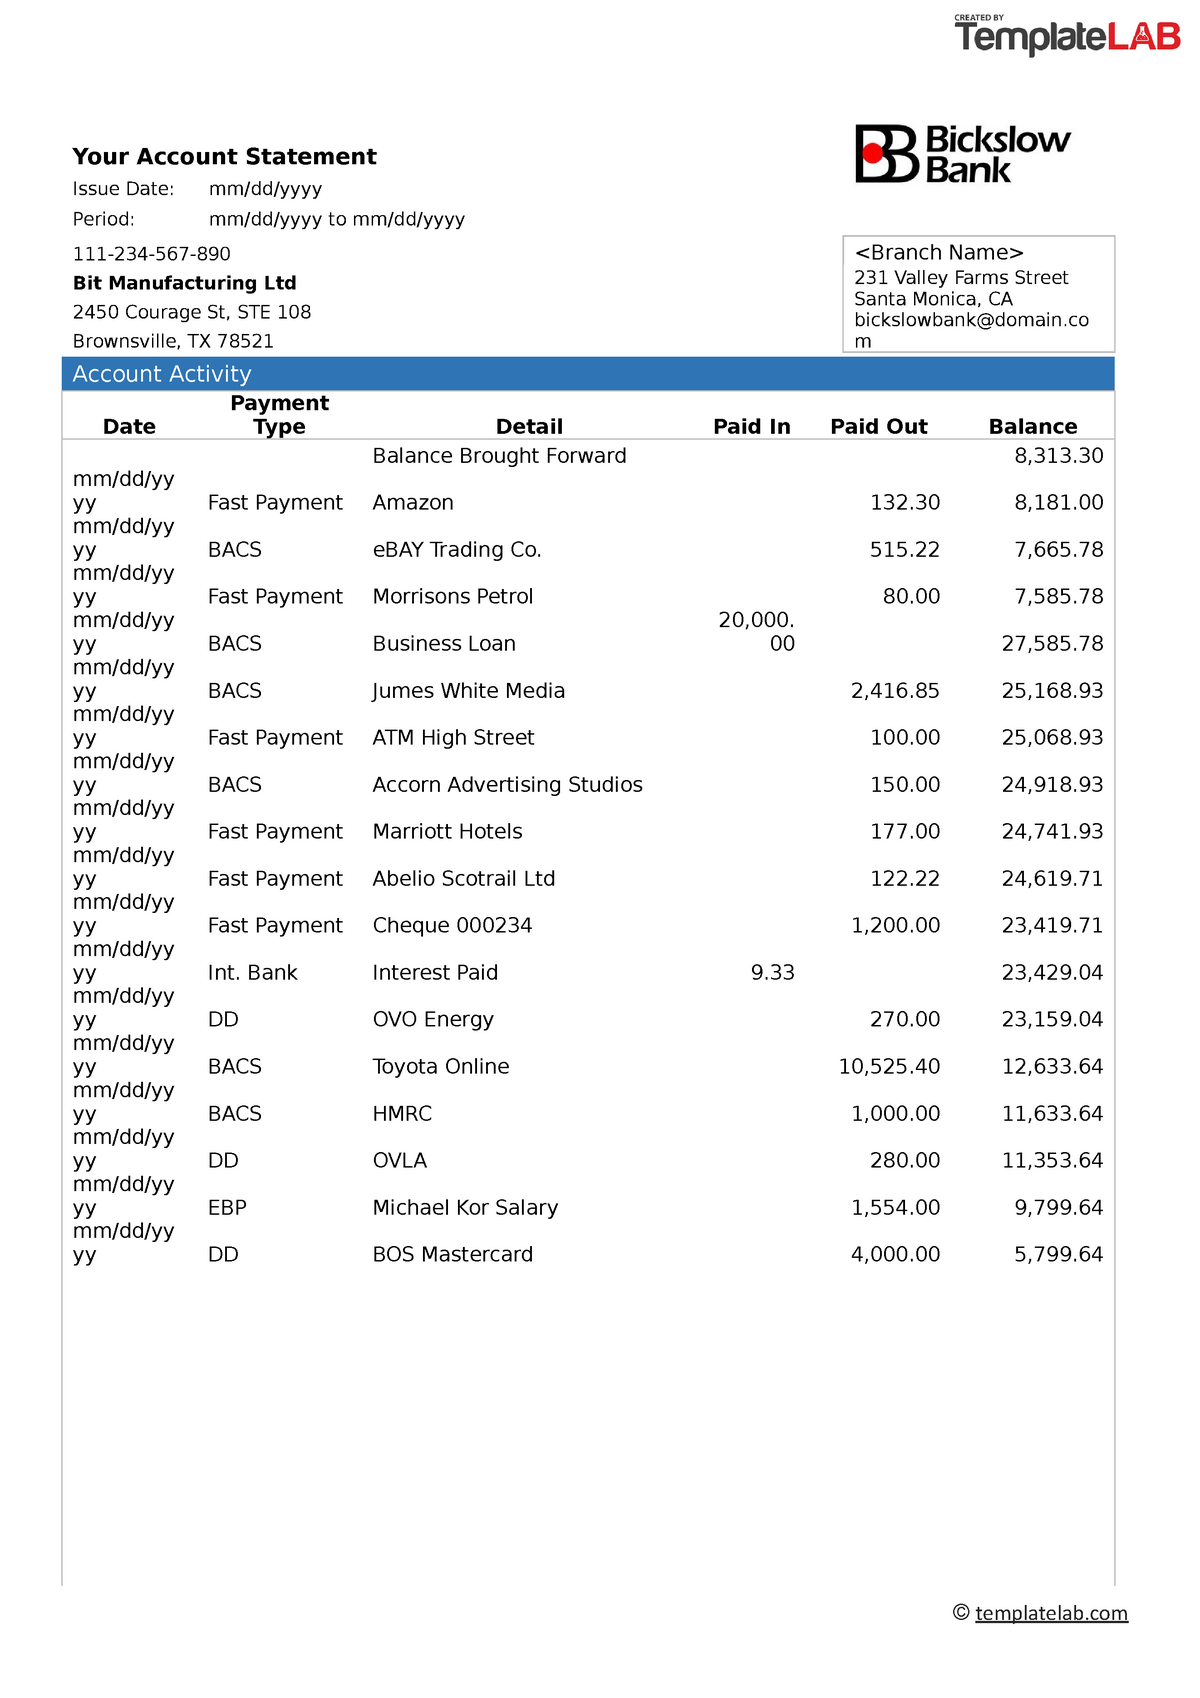 Bank Statement Template 2 - Template Lab - Your Account Statement Issue ...